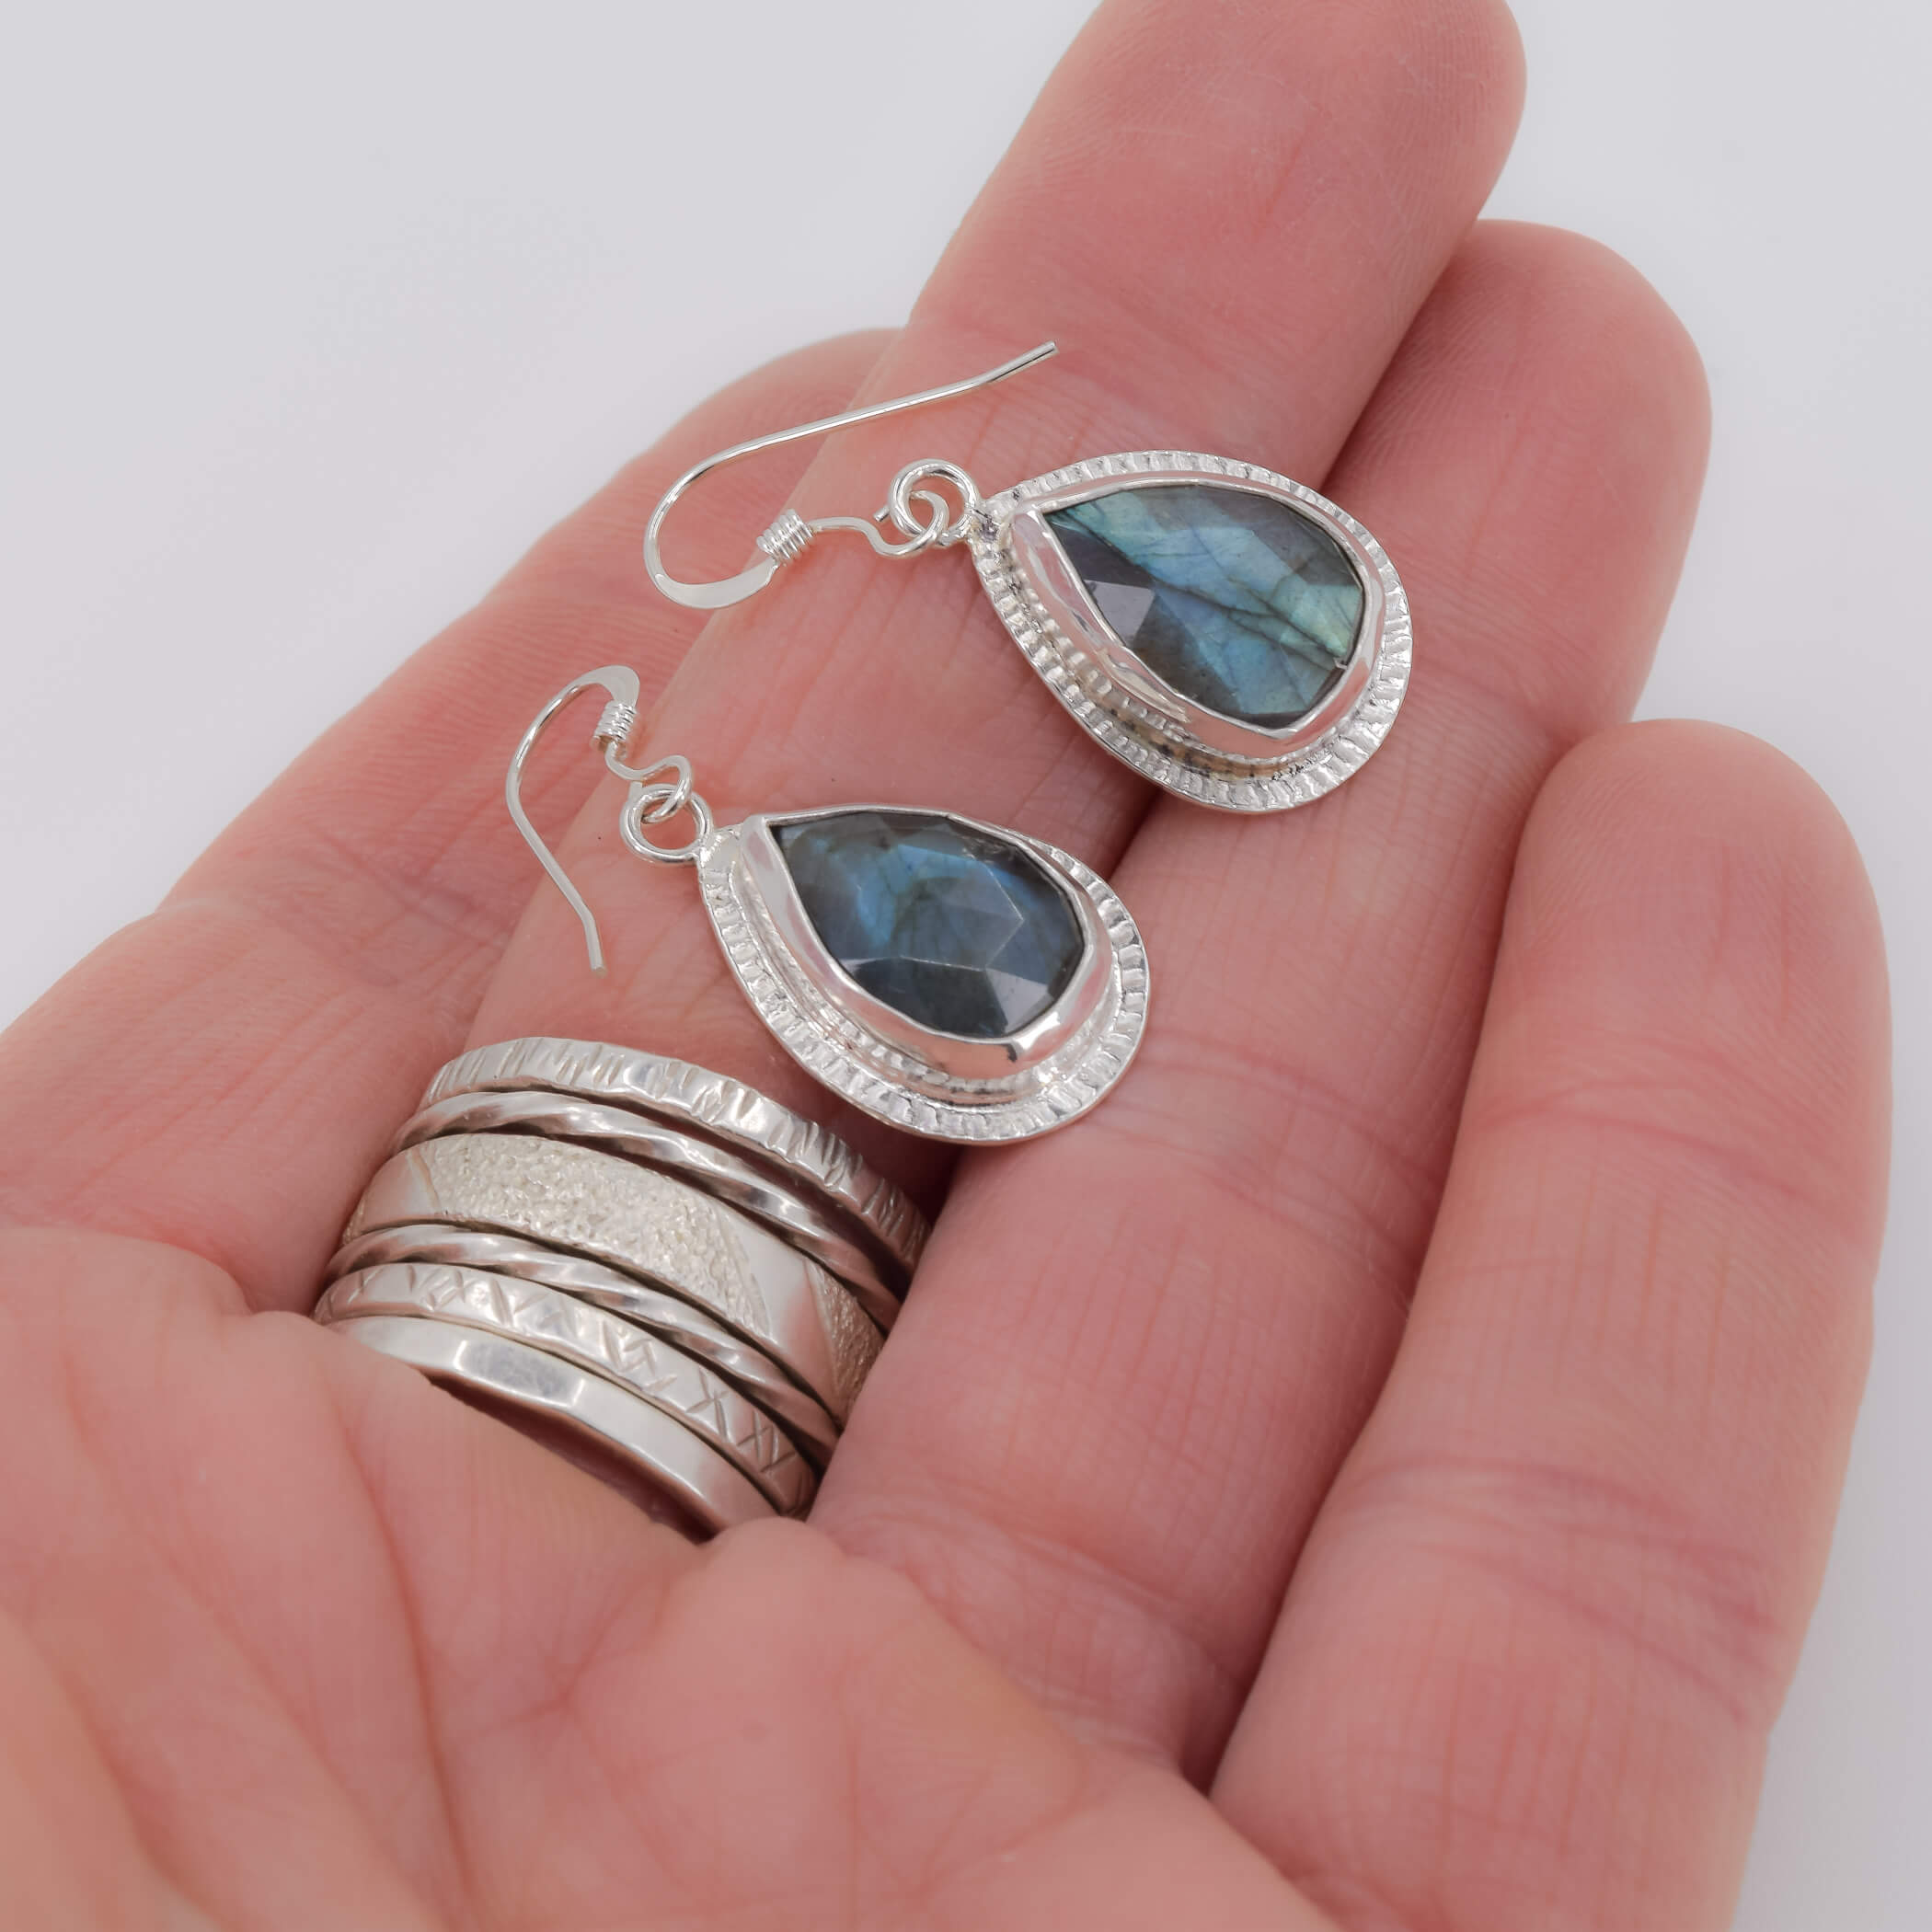 Teardrop shaped labradrotie drop earrings set in sterling silver with a detailed border adorning the edges of the stones shown in hand for scale